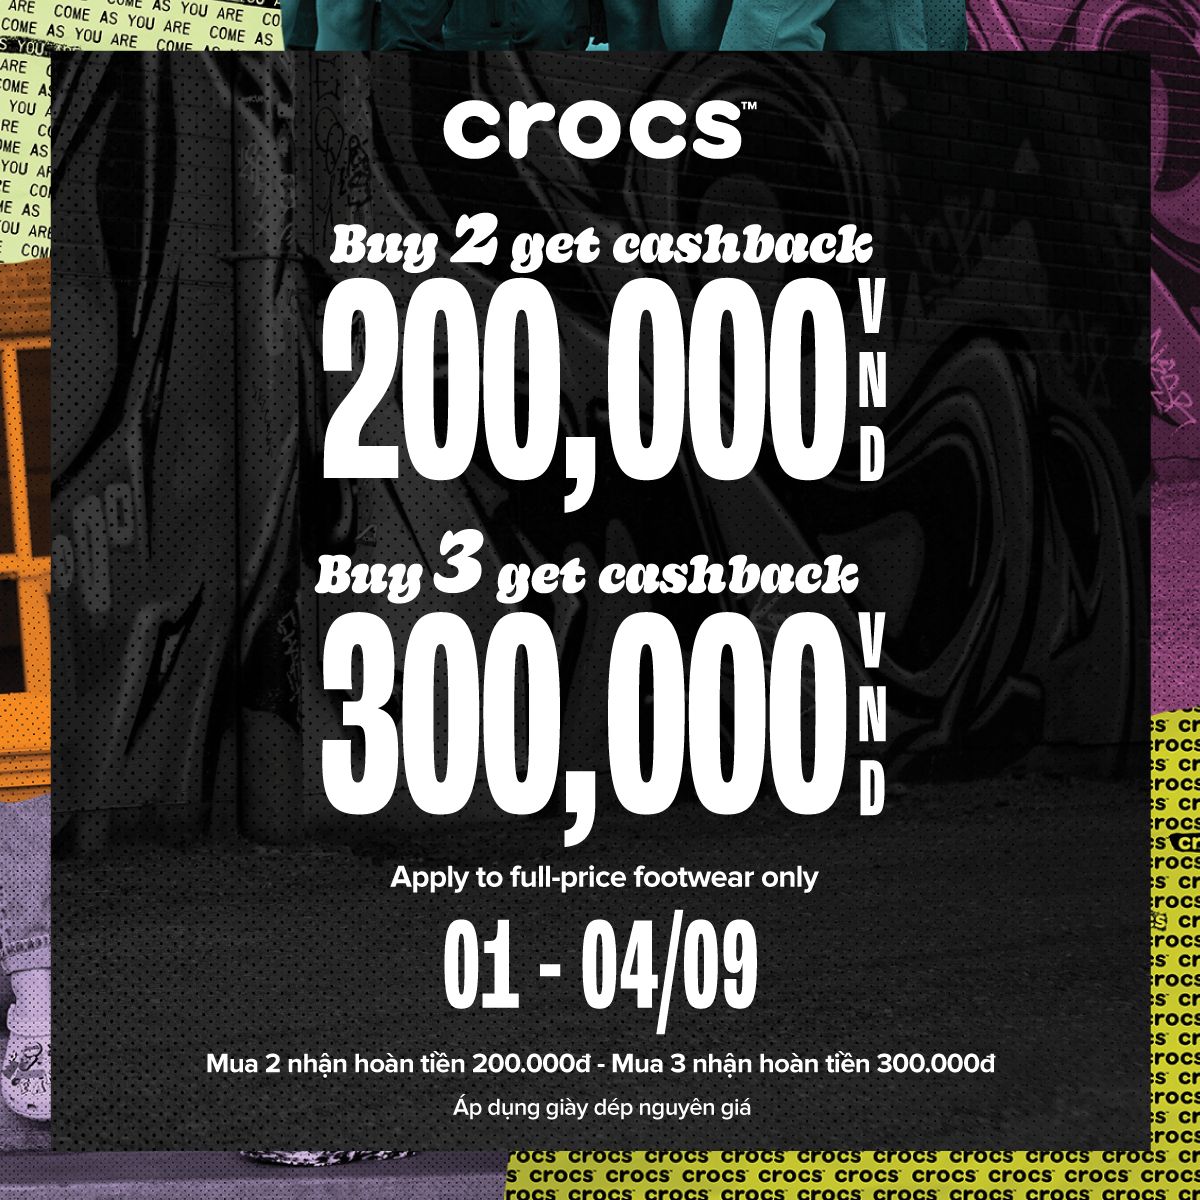 🌟𝐍𝐀𝐓𝐈𝐎𝐍𝐀𝐋 𝐃𝐀𝐘🌟 CROCS SPECIAL OFFERS: DON’T THINK. ONLY SHOP